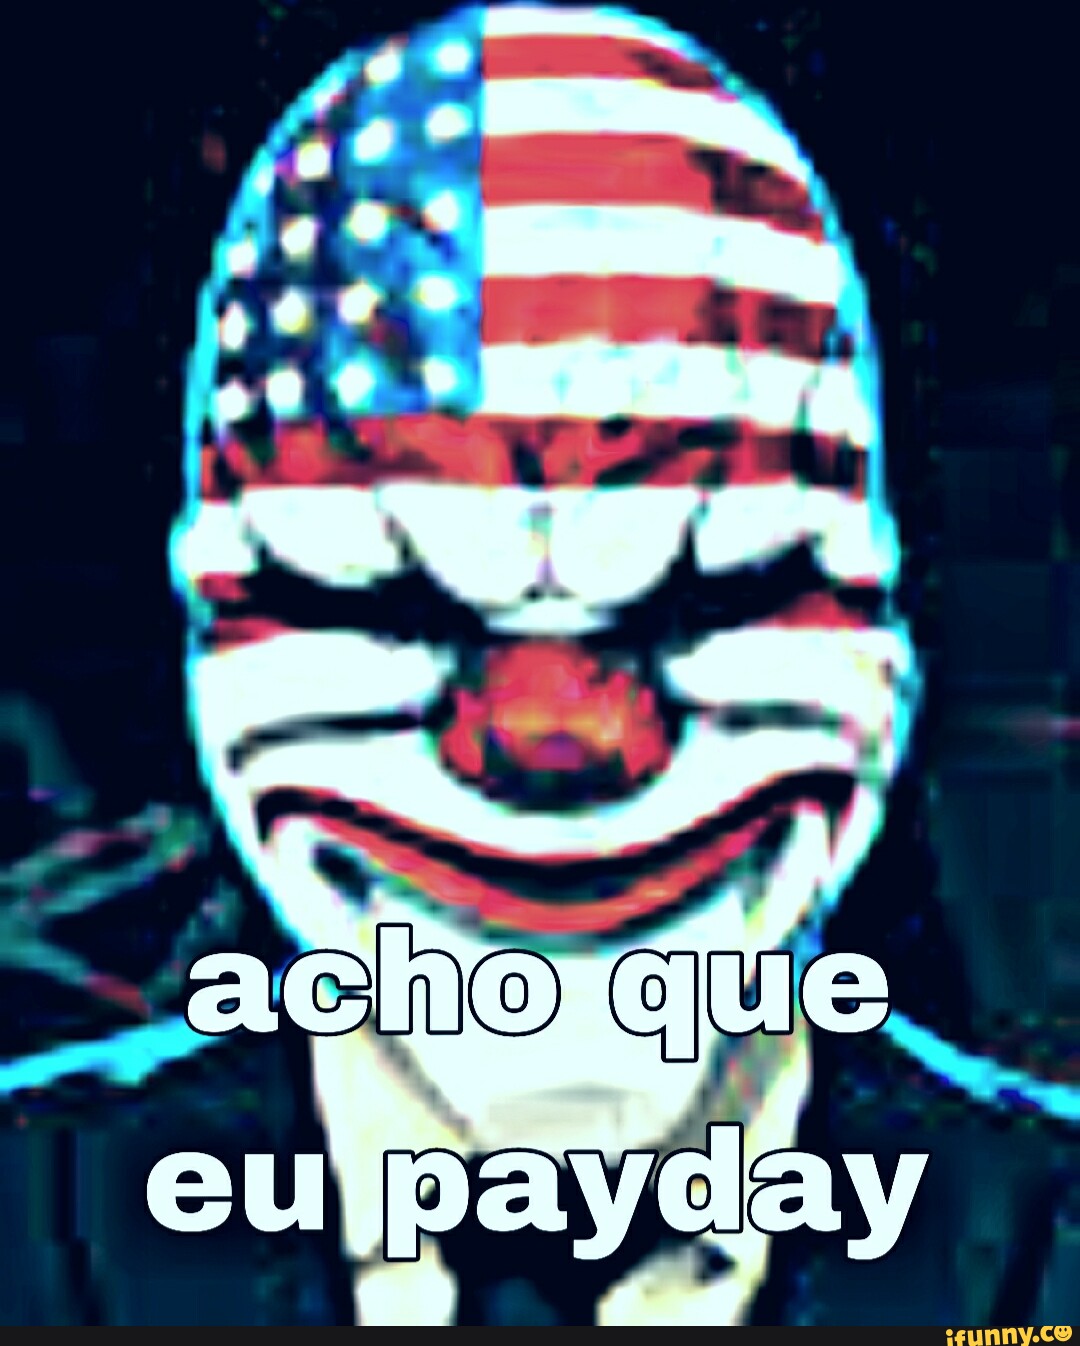 Payday memes. Best Collection of funny Payday pictures on iFunny Brazil